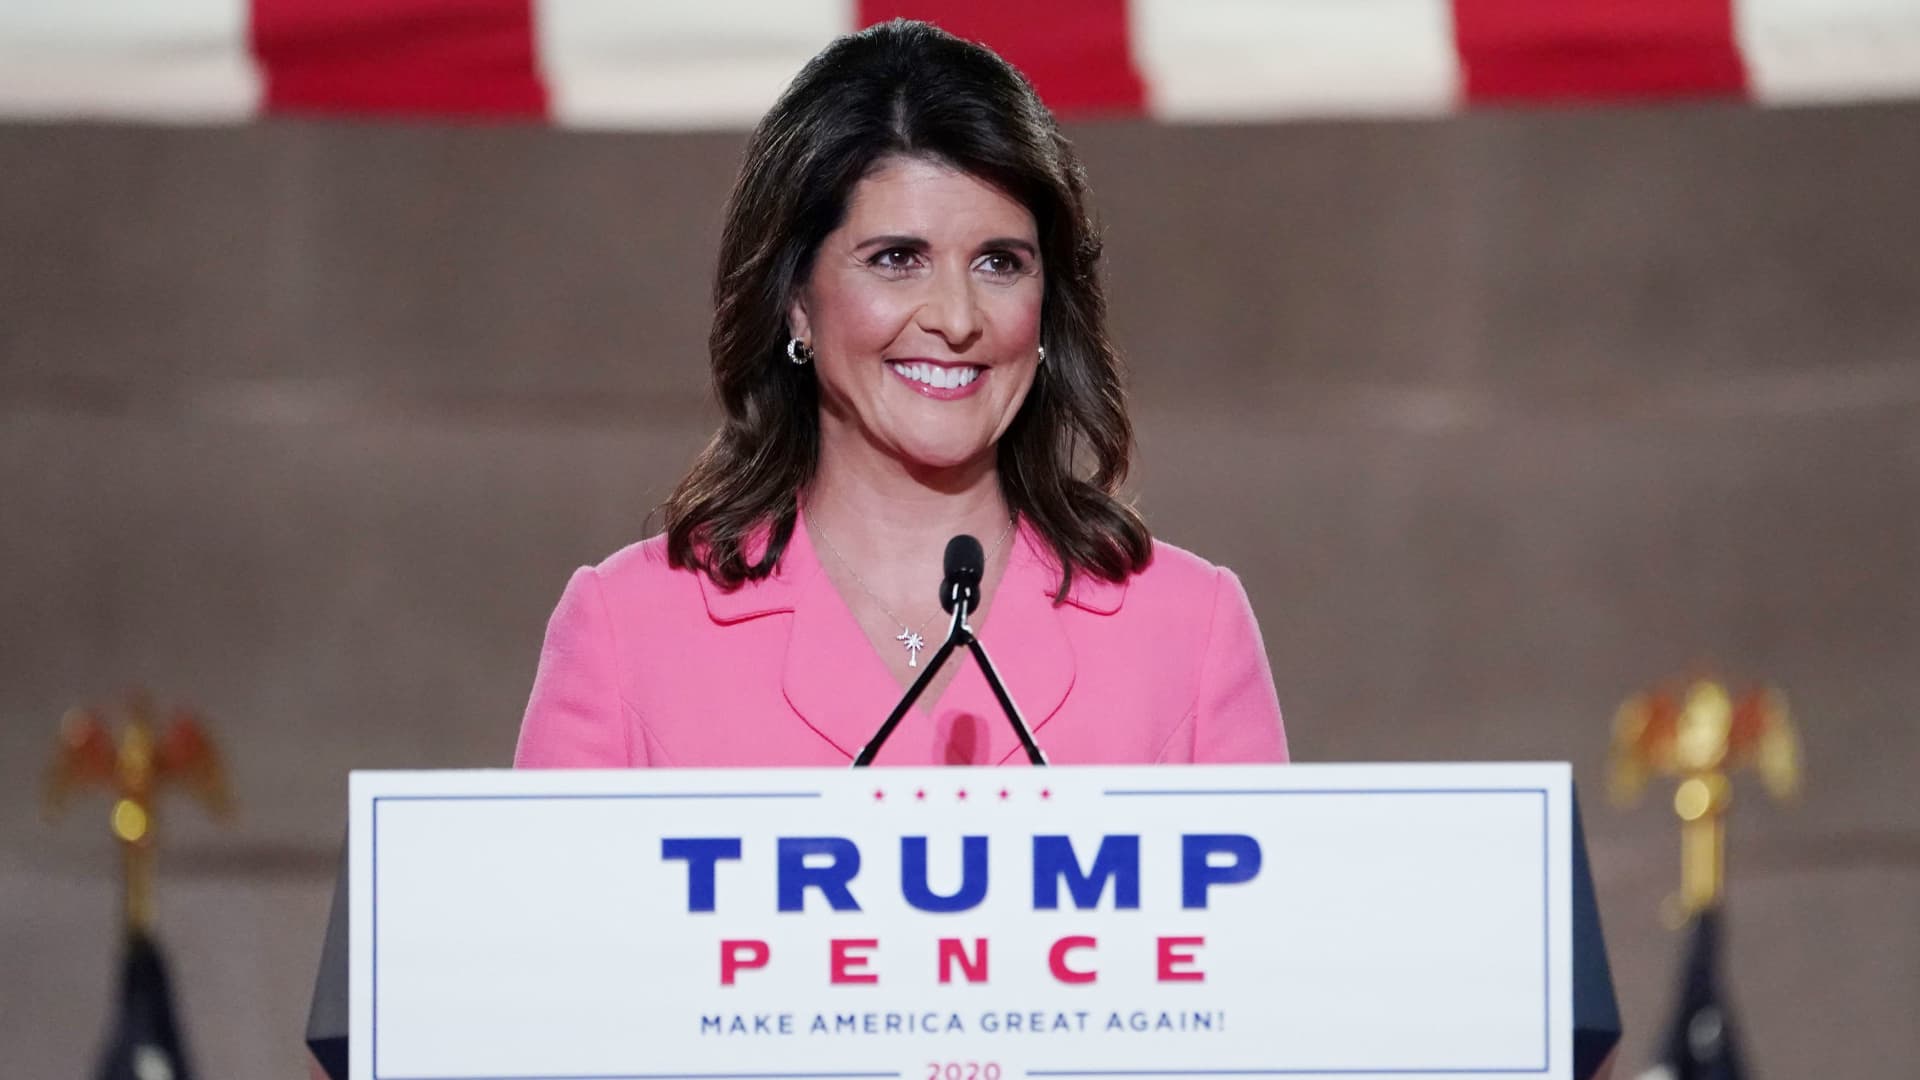 Former U.S. Ambassador to the United Nations Nikki Haley speaks to the largely virtual 2020 Republican National Convention in a live address from the Mellon Auditorium in Washington, U.S., August 24, 2020.